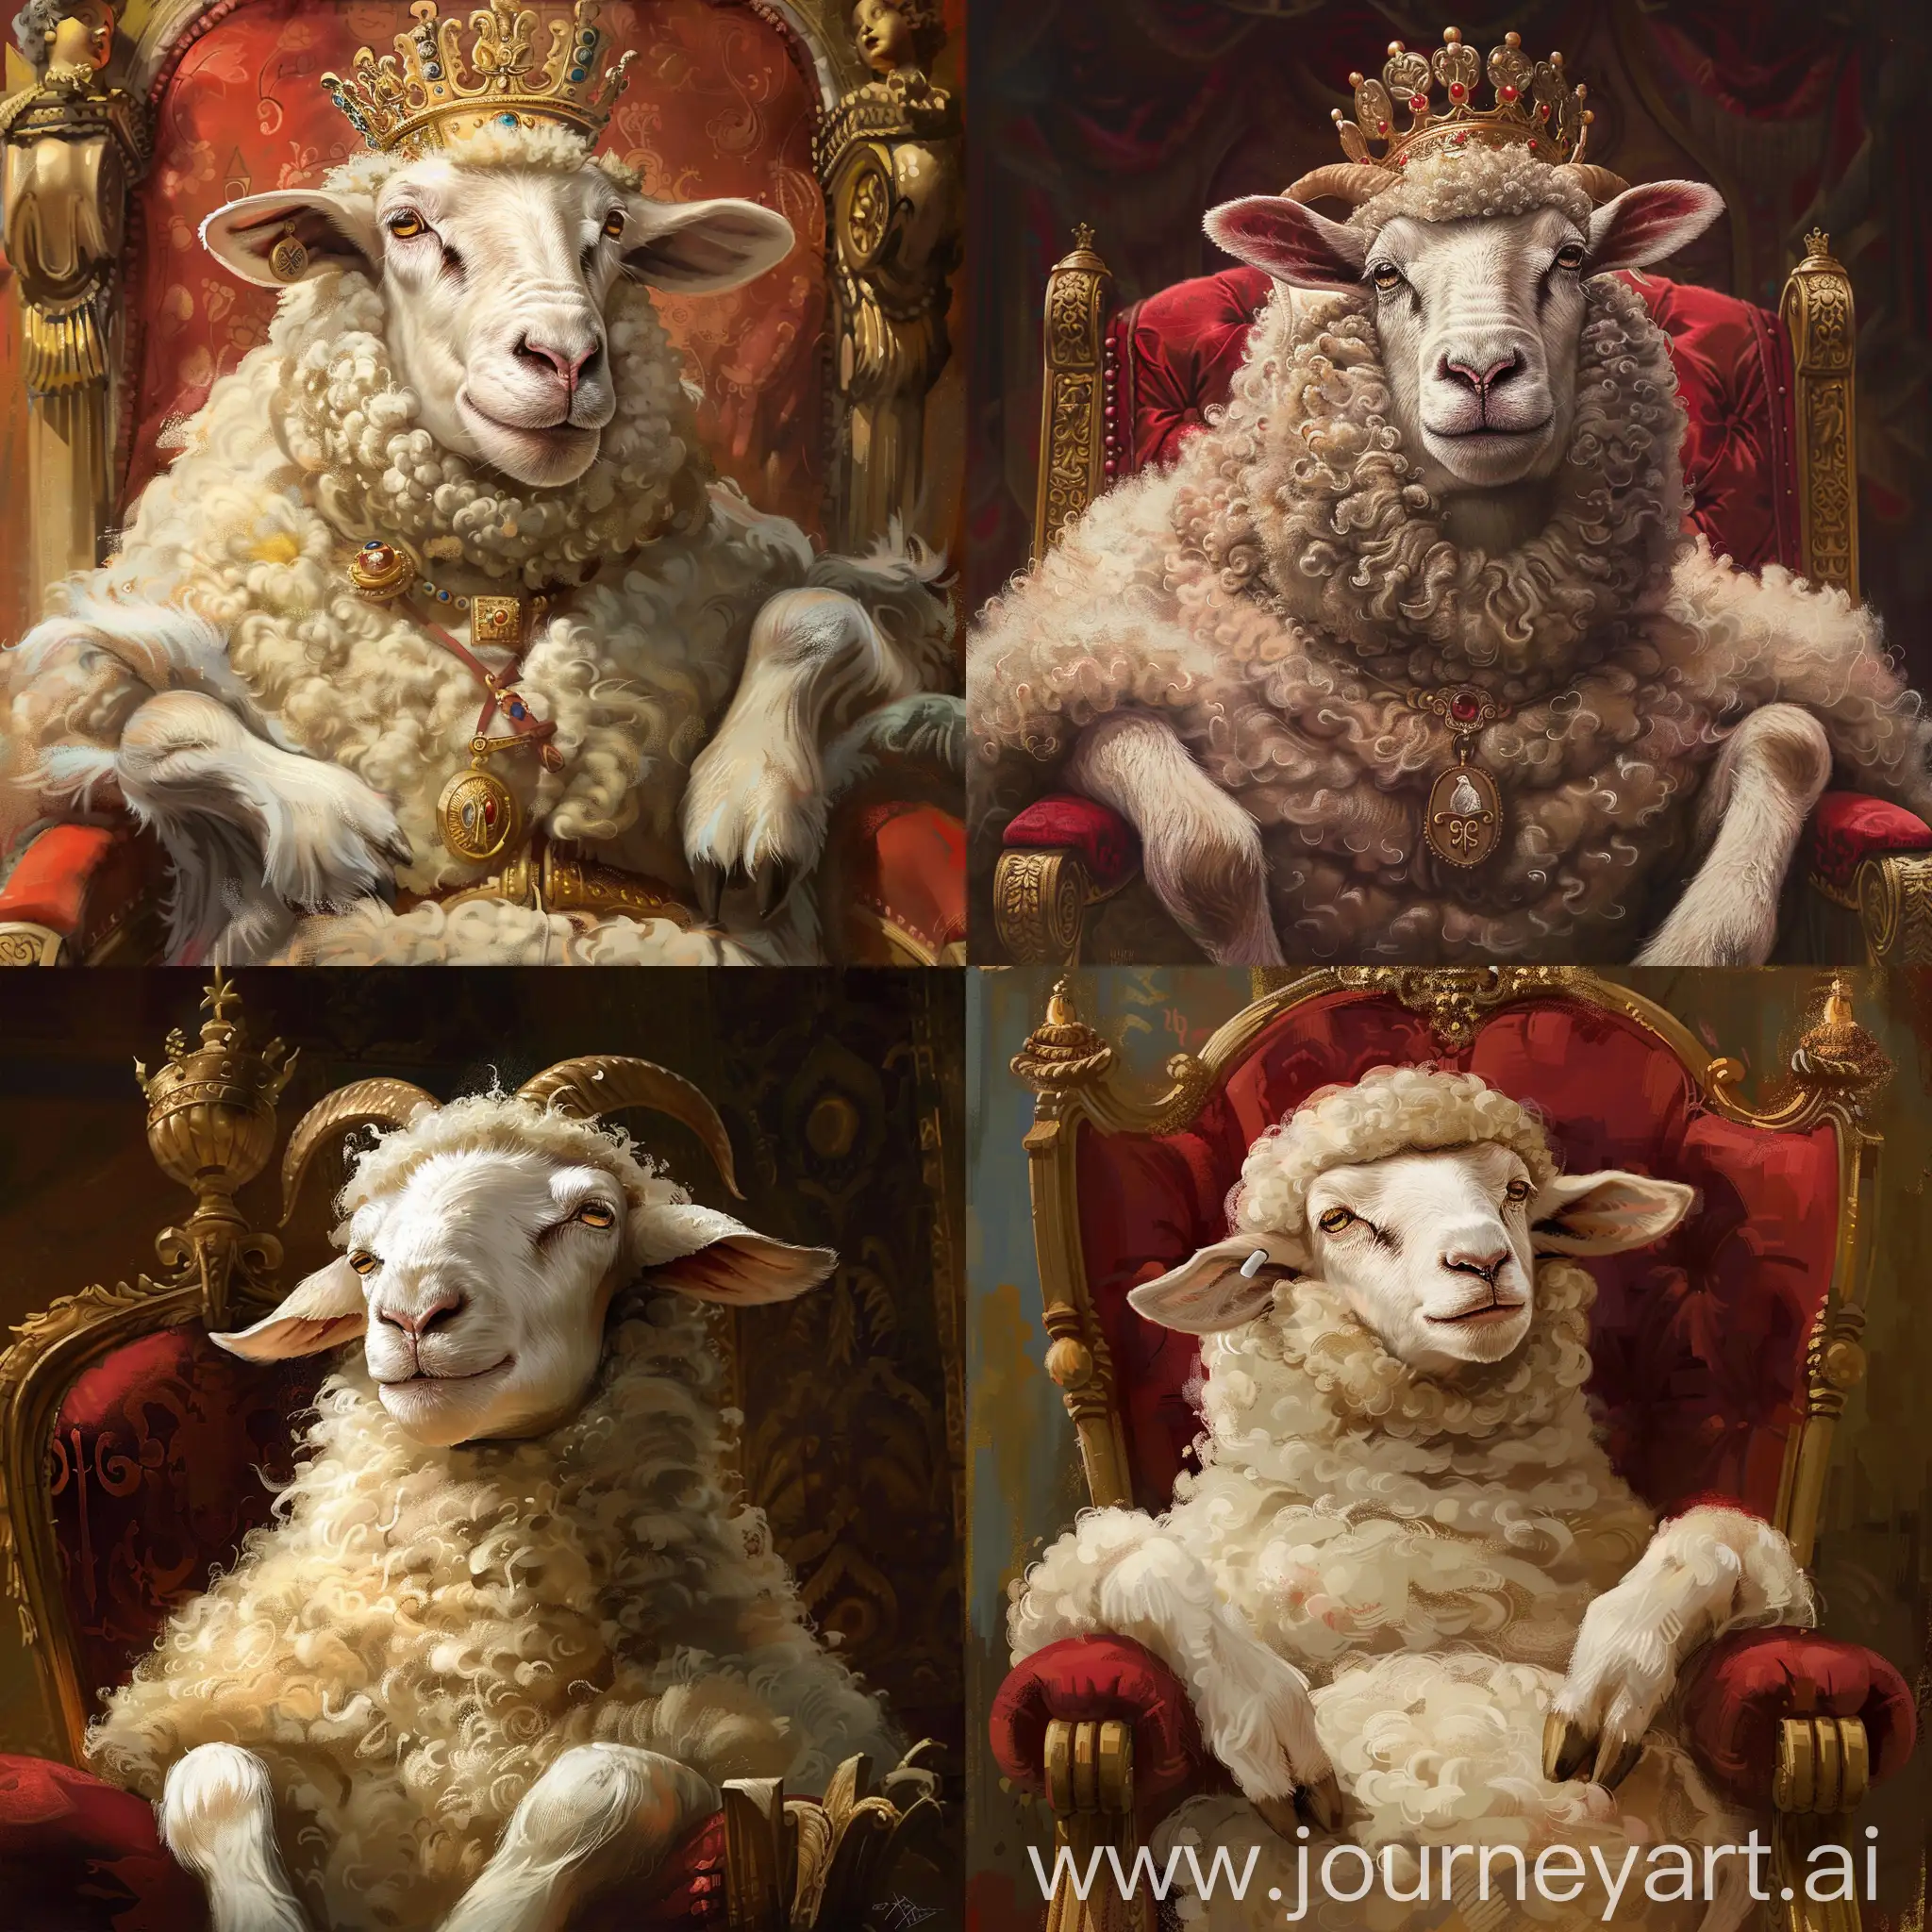 Draw a sheep that has a smile on its face and is like a king on a royal throne, very real, like Da Vinci's paintings, majestic